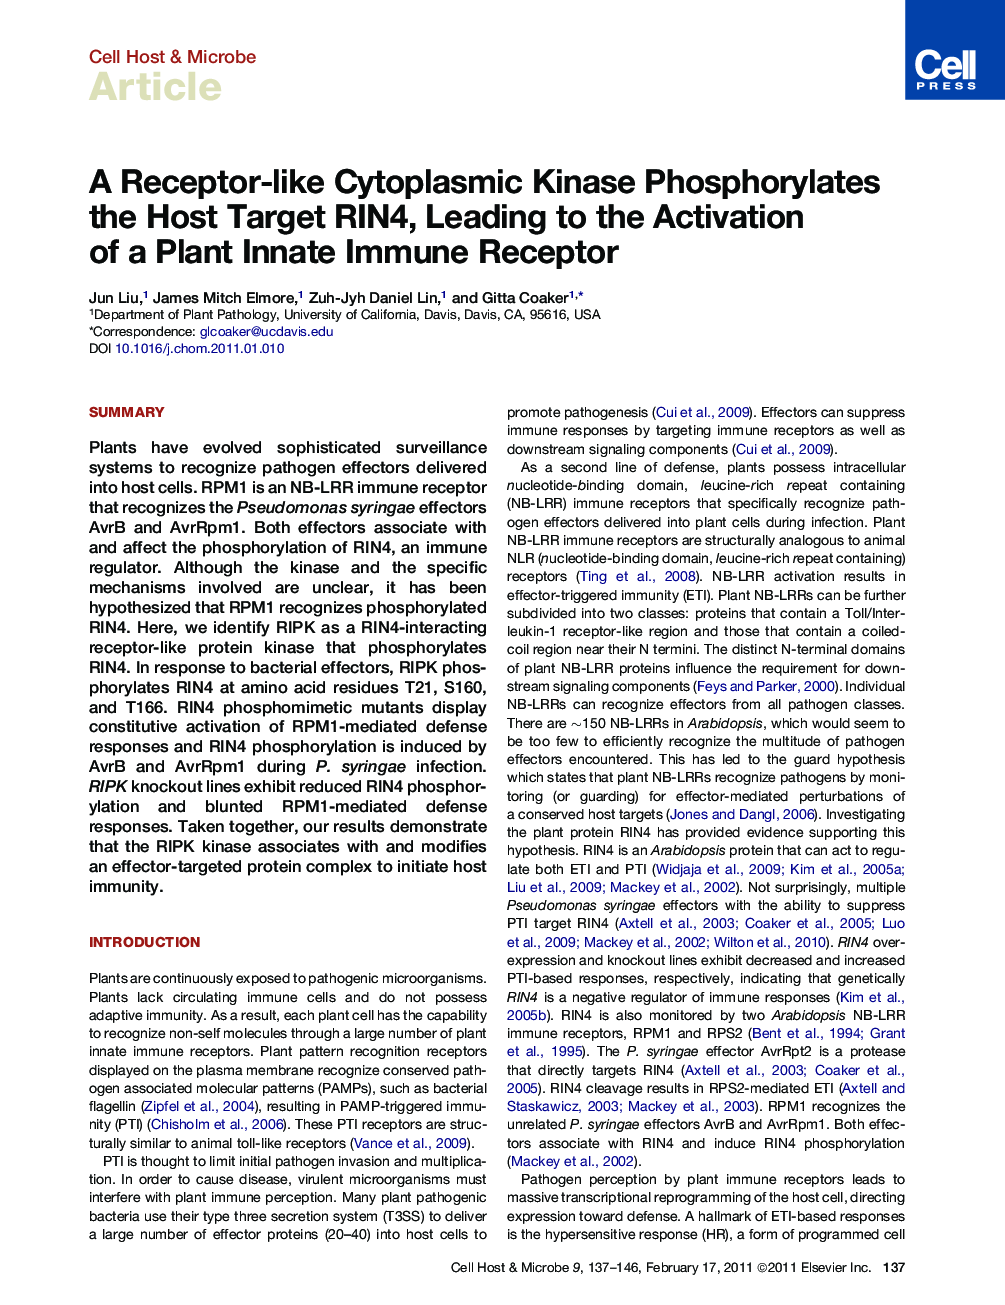 A Receptor-like Cytoplasmic Kinase Phosphorylates the Host Target RIN4, Leading to the Activation of a Plant Innate Immune Receptor